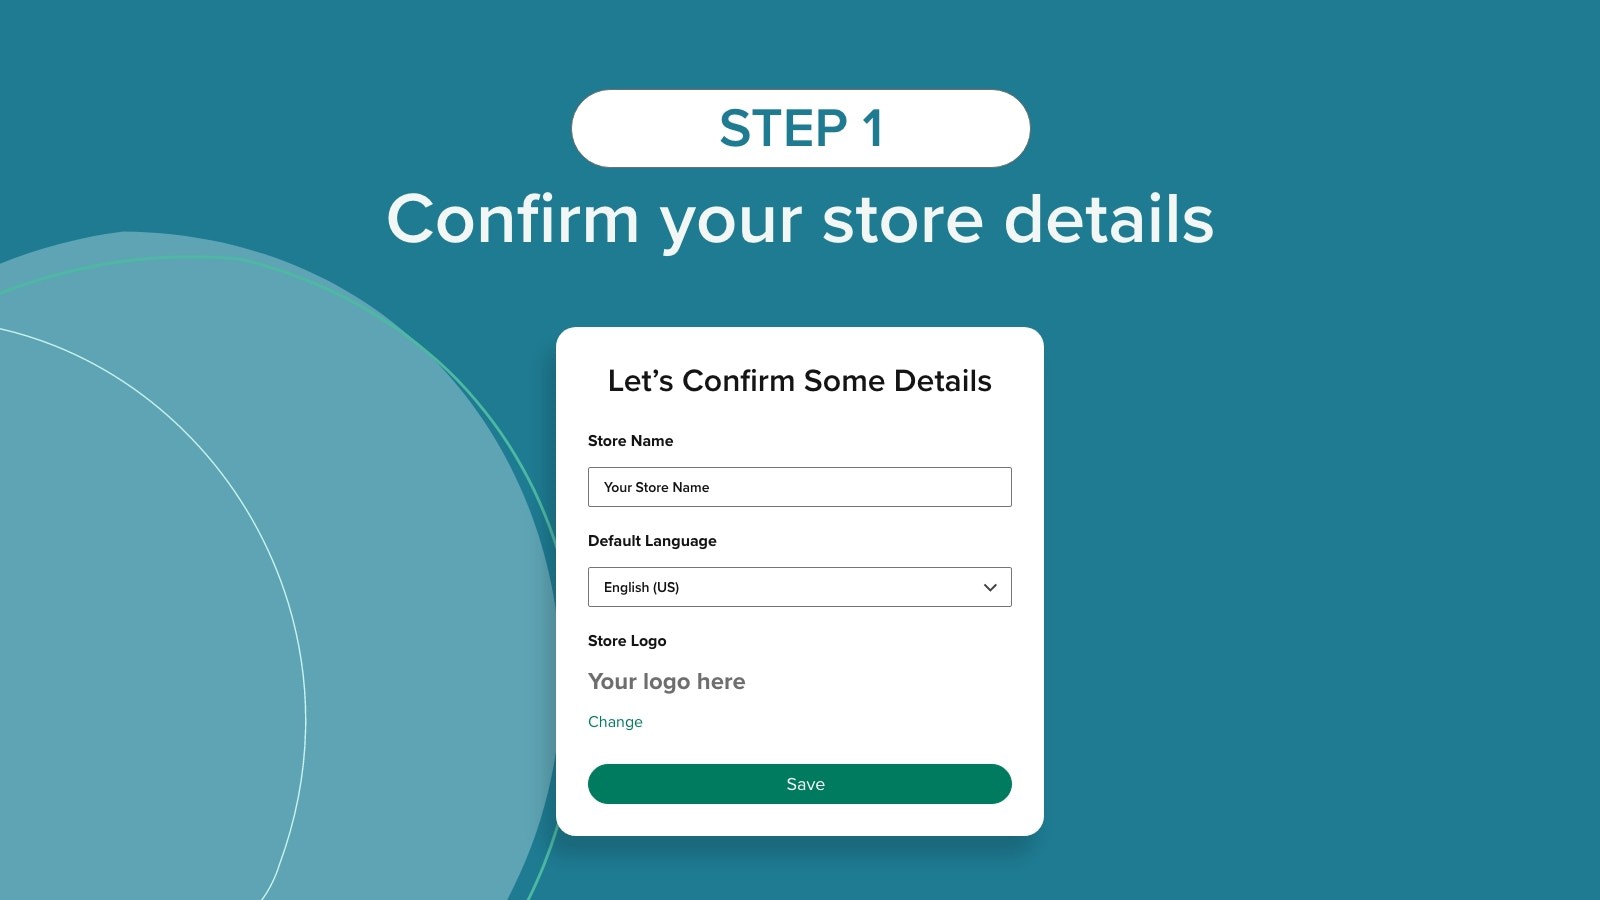 Step 1, confirm your store details